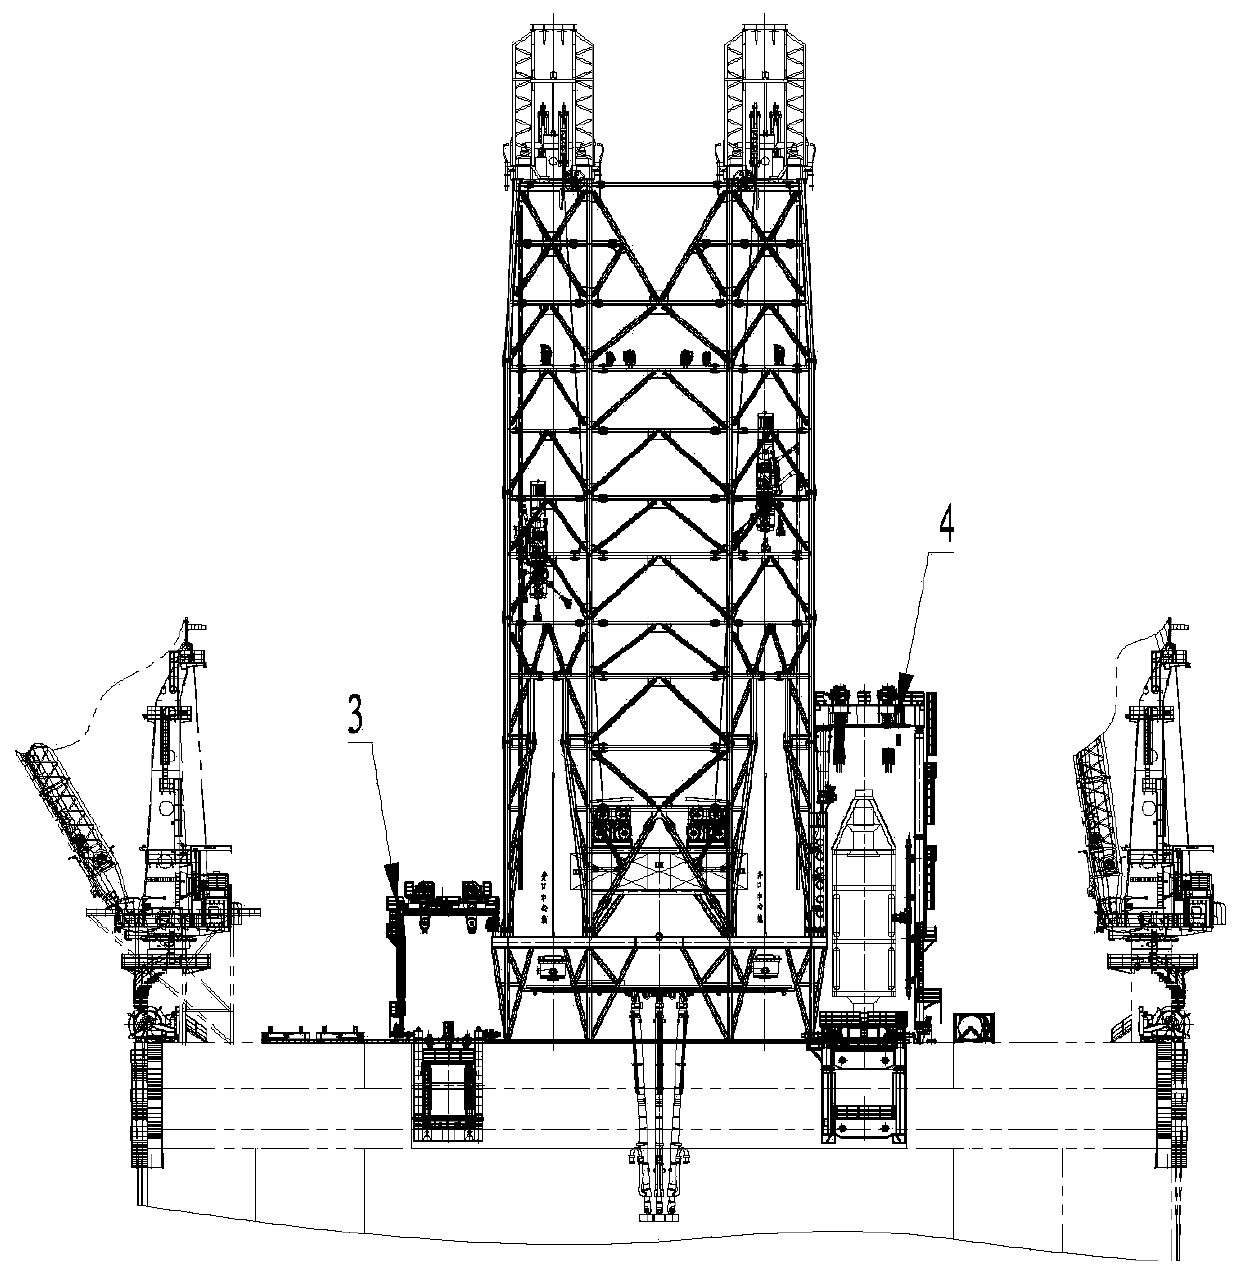 Double-main-wellhead drilling system of semi-submersible drilling platform